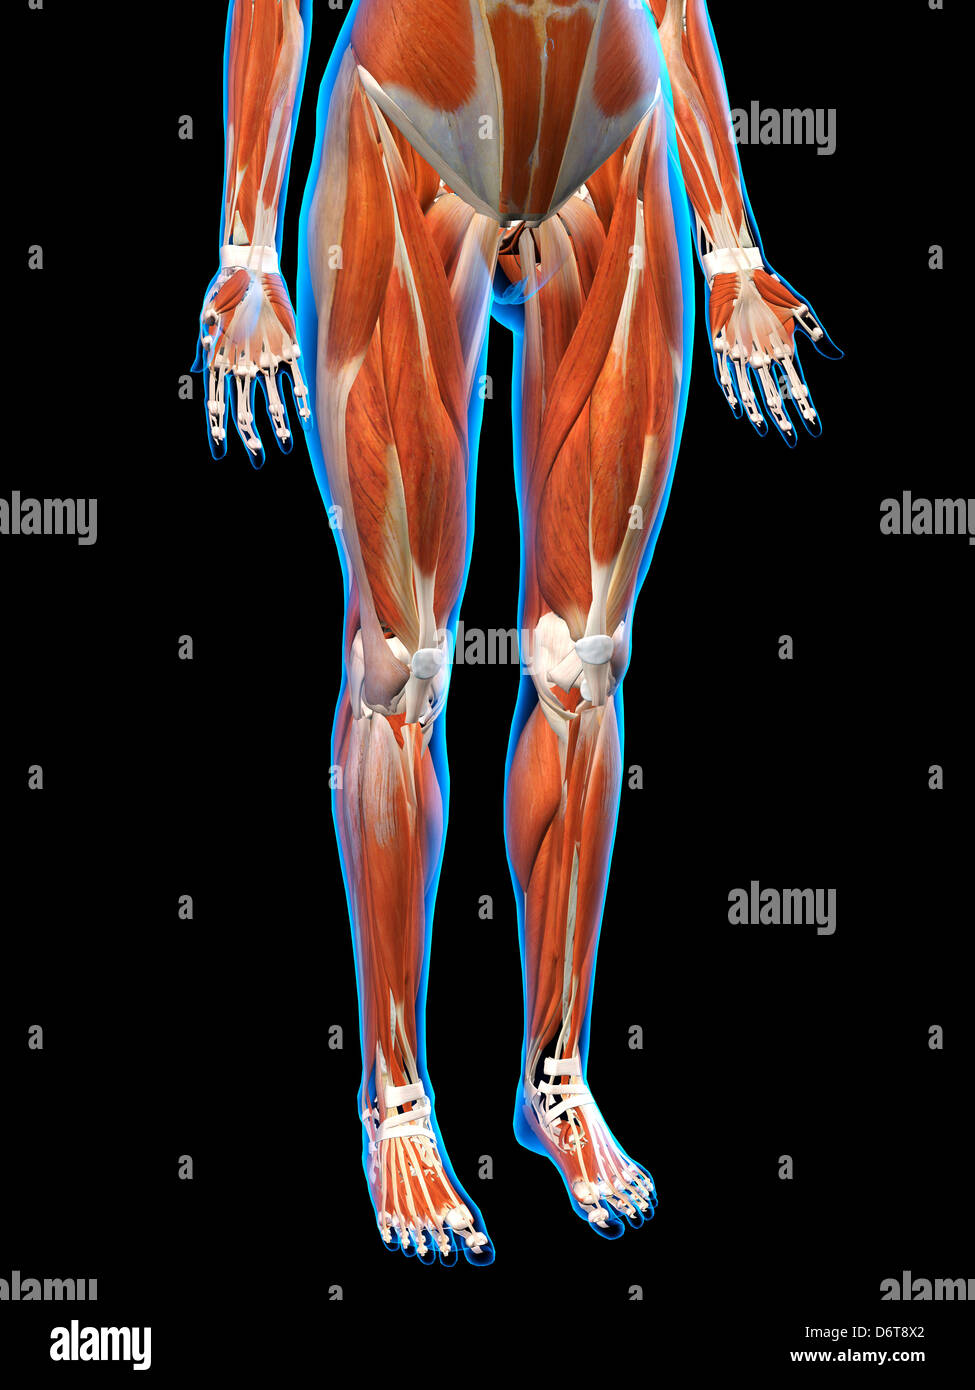 Female lower back muscles anatomy in blue X-Ray outline Full Color